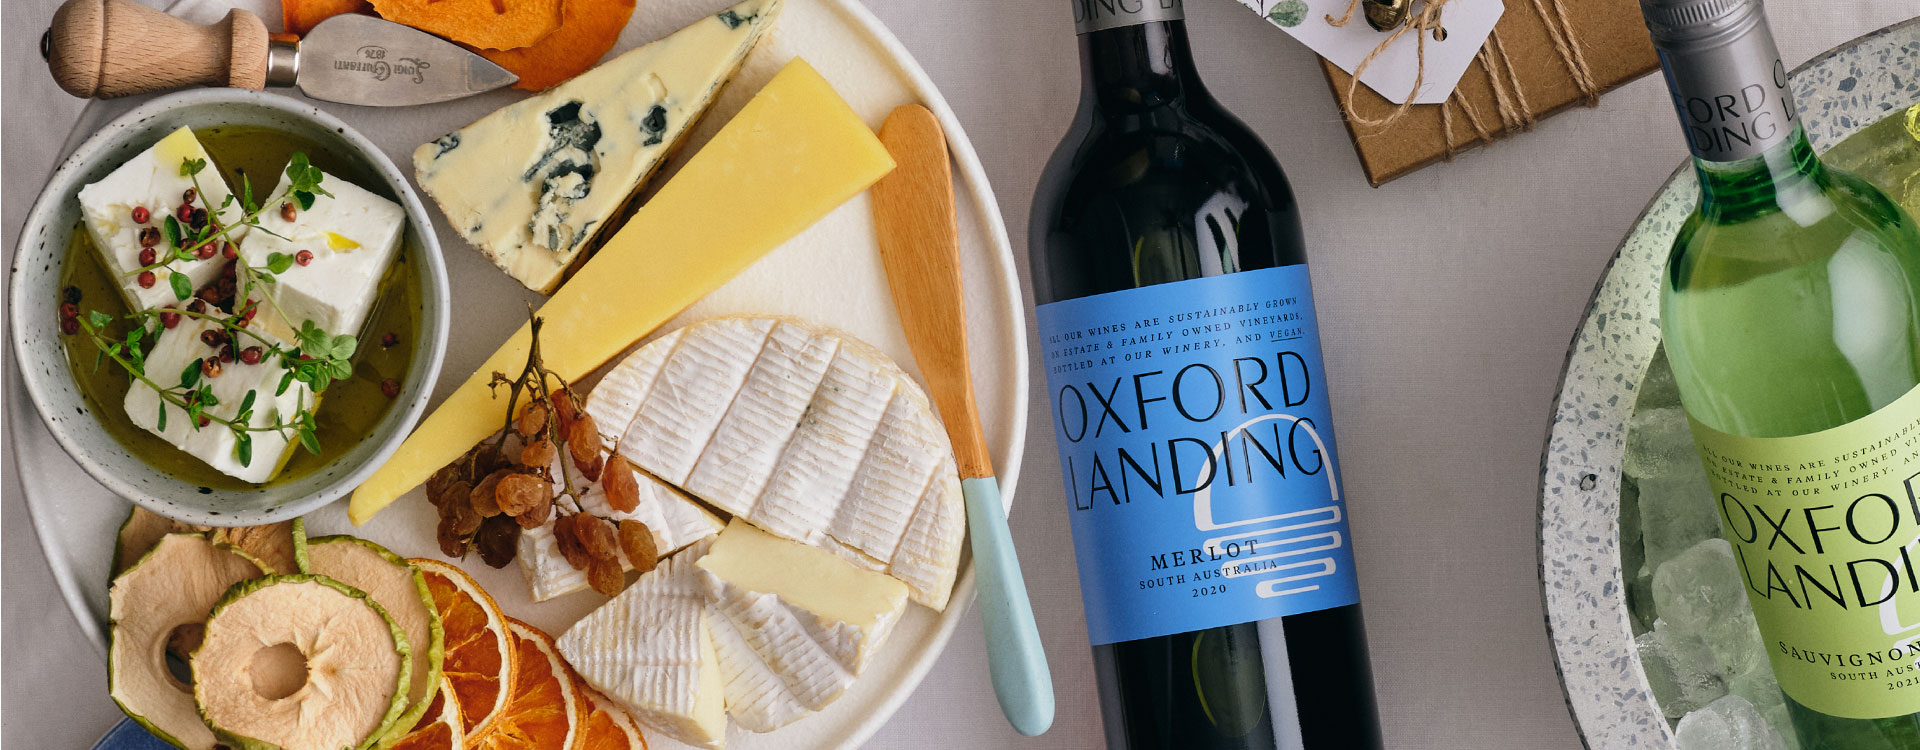 How to Build a Festive Cheese Board